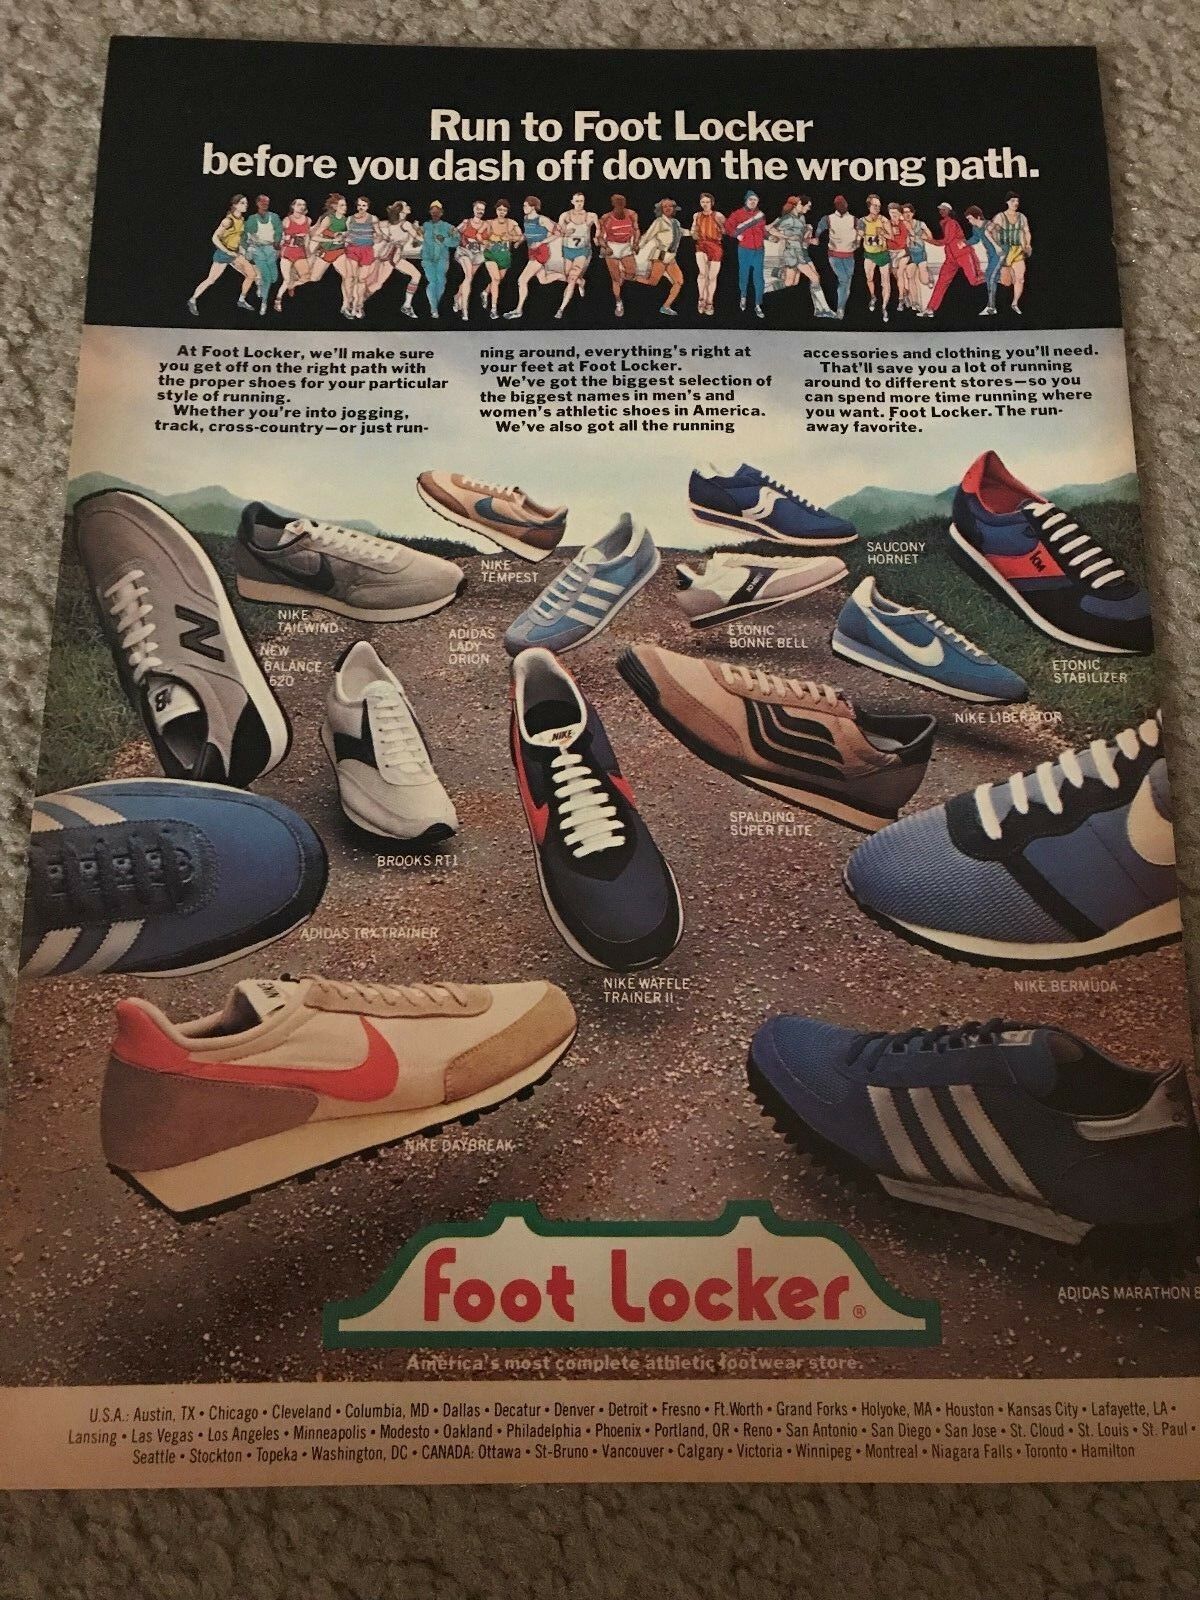 FOOT LOCKER NIKE WAFFLE TRAINER DAYBREAK TAILWIND Shoes Poster Print Ad 1970s